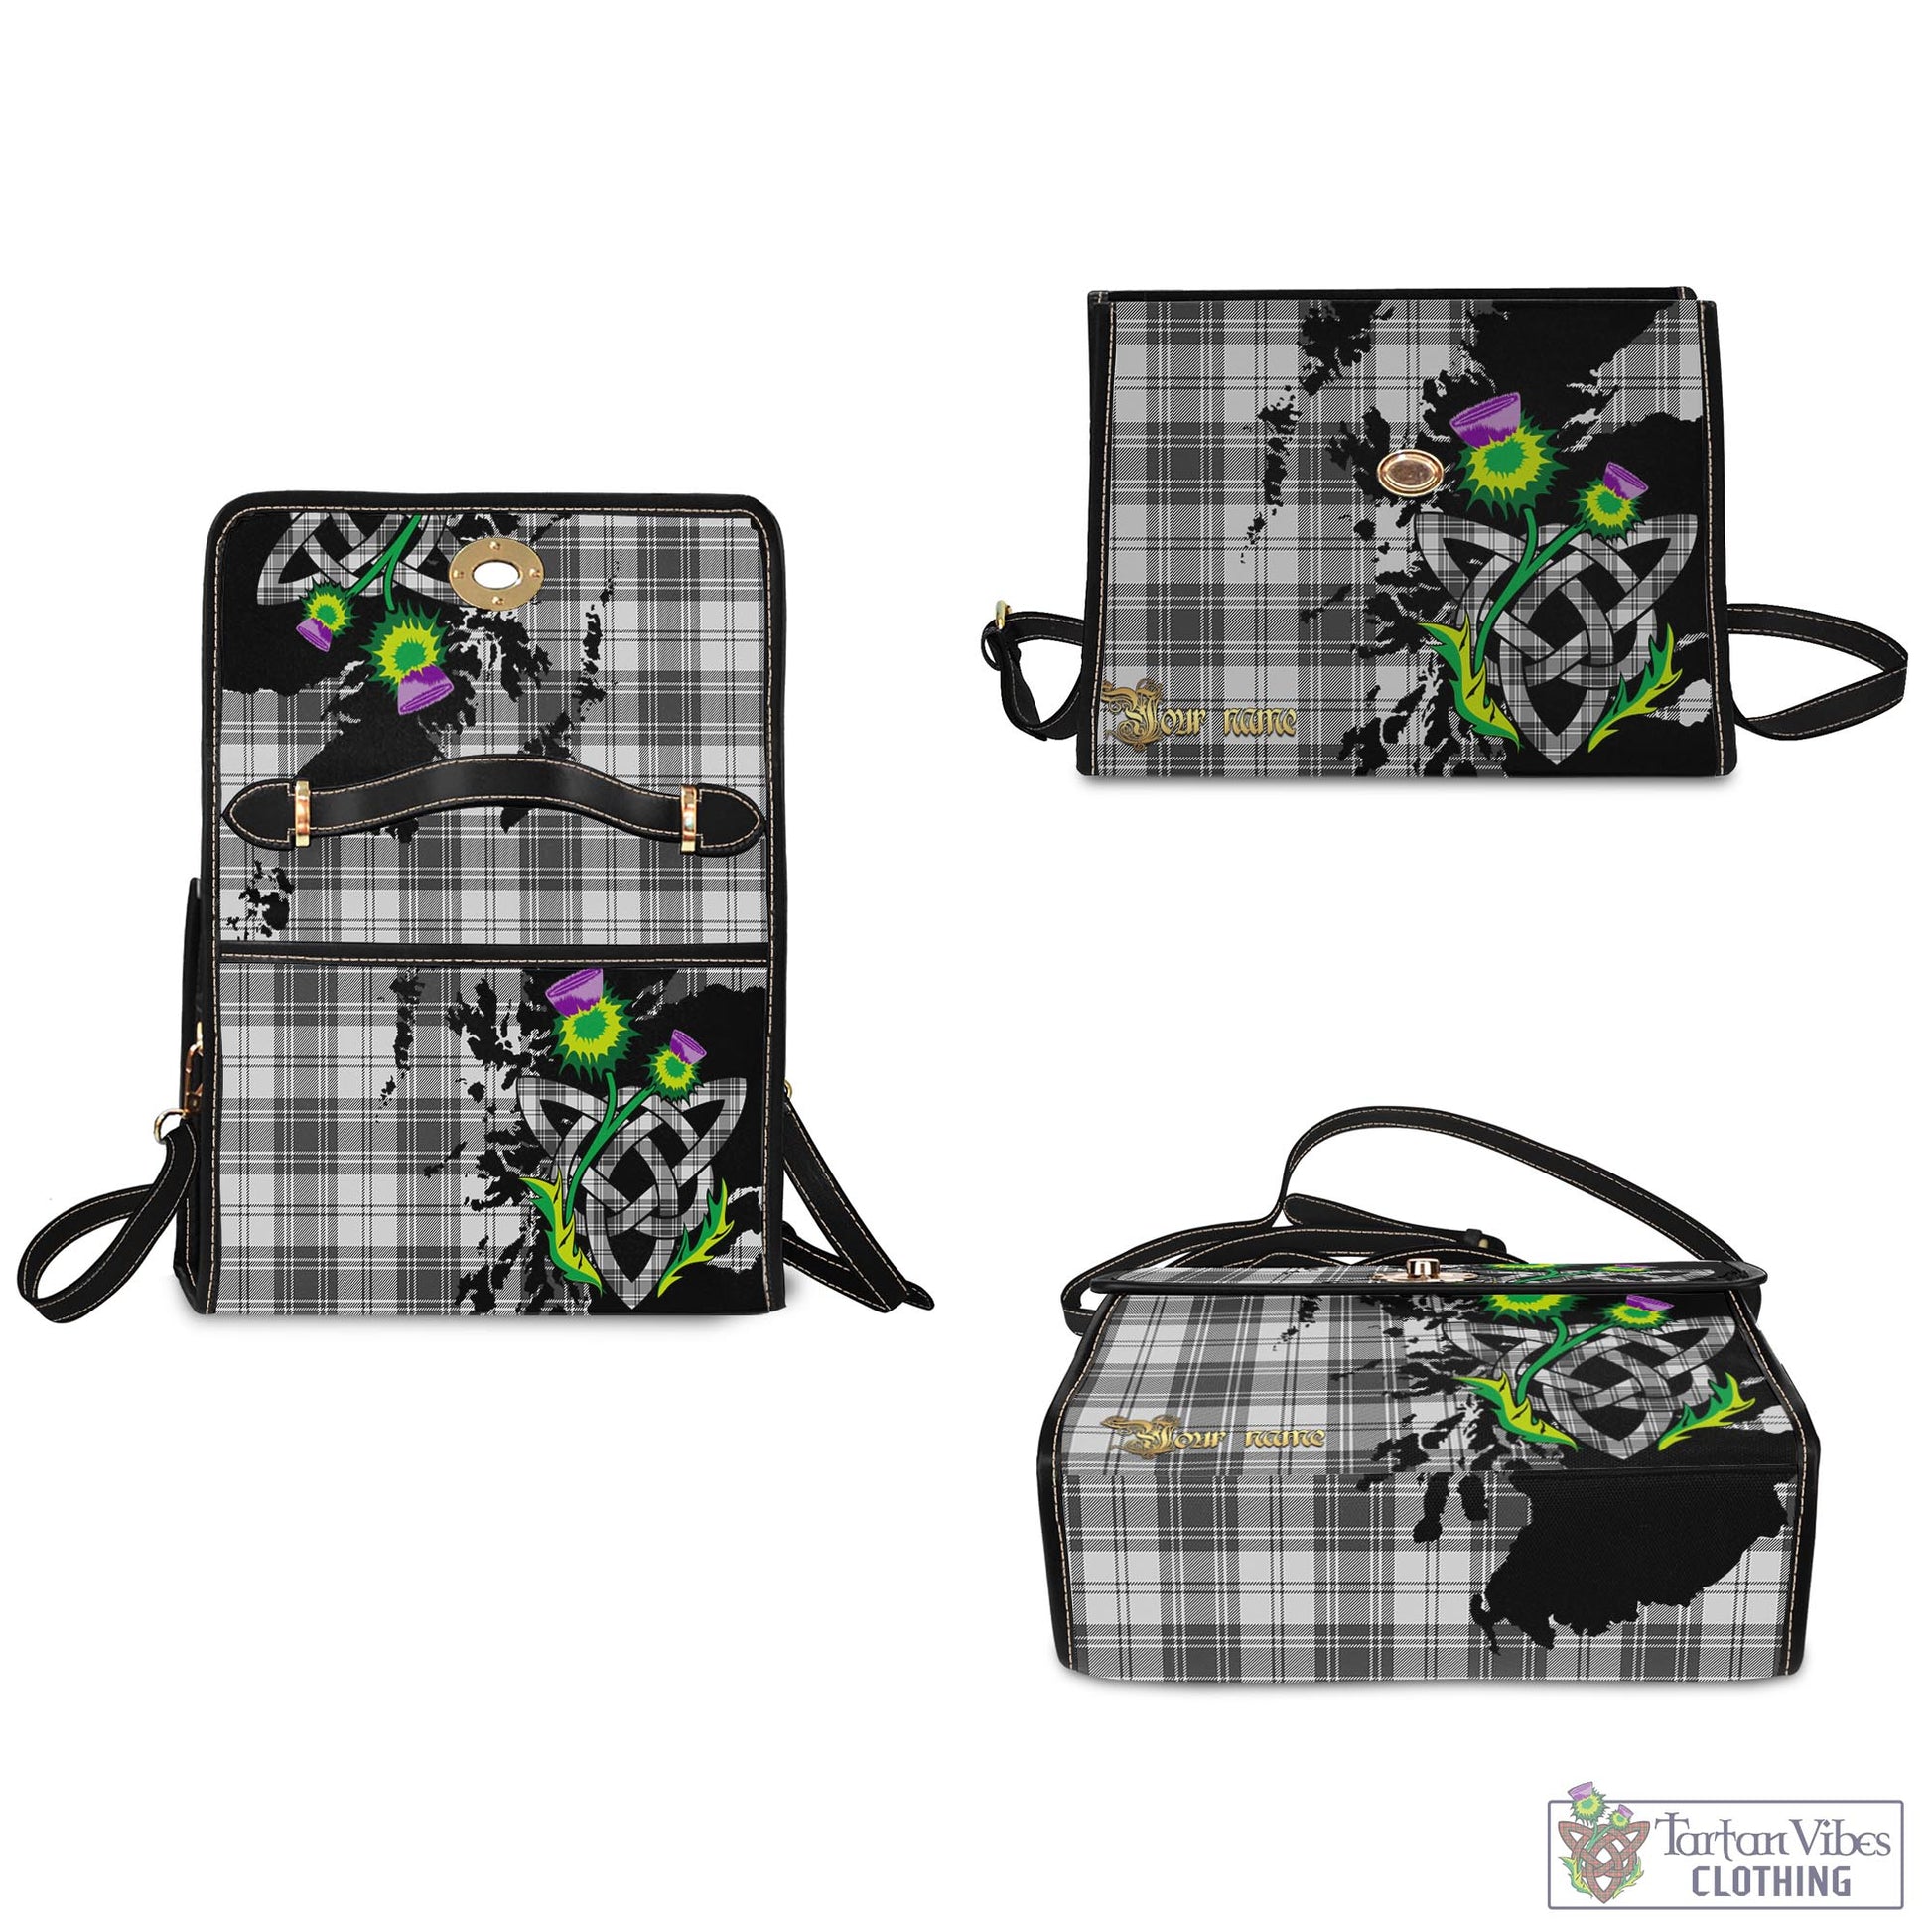 Tartan Vibes Clothing Glen Tartan Waterproof Canvas Bag with Scotland Map and Thistle Celtic Accents